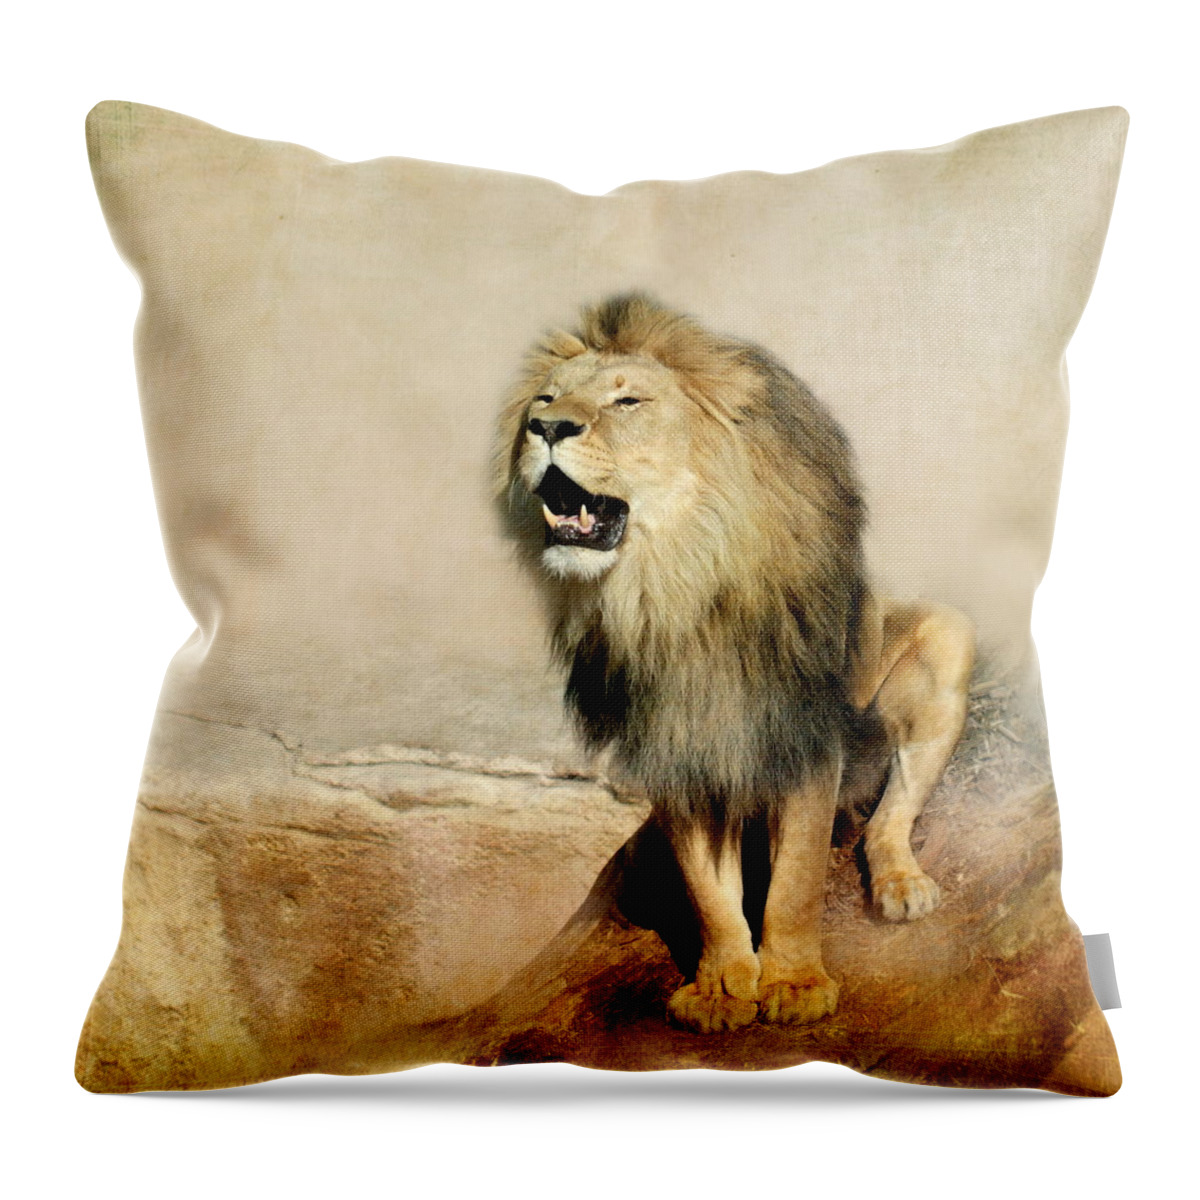 Lion Throw Pillow featuring the photograph Lion by Heike Hultsch